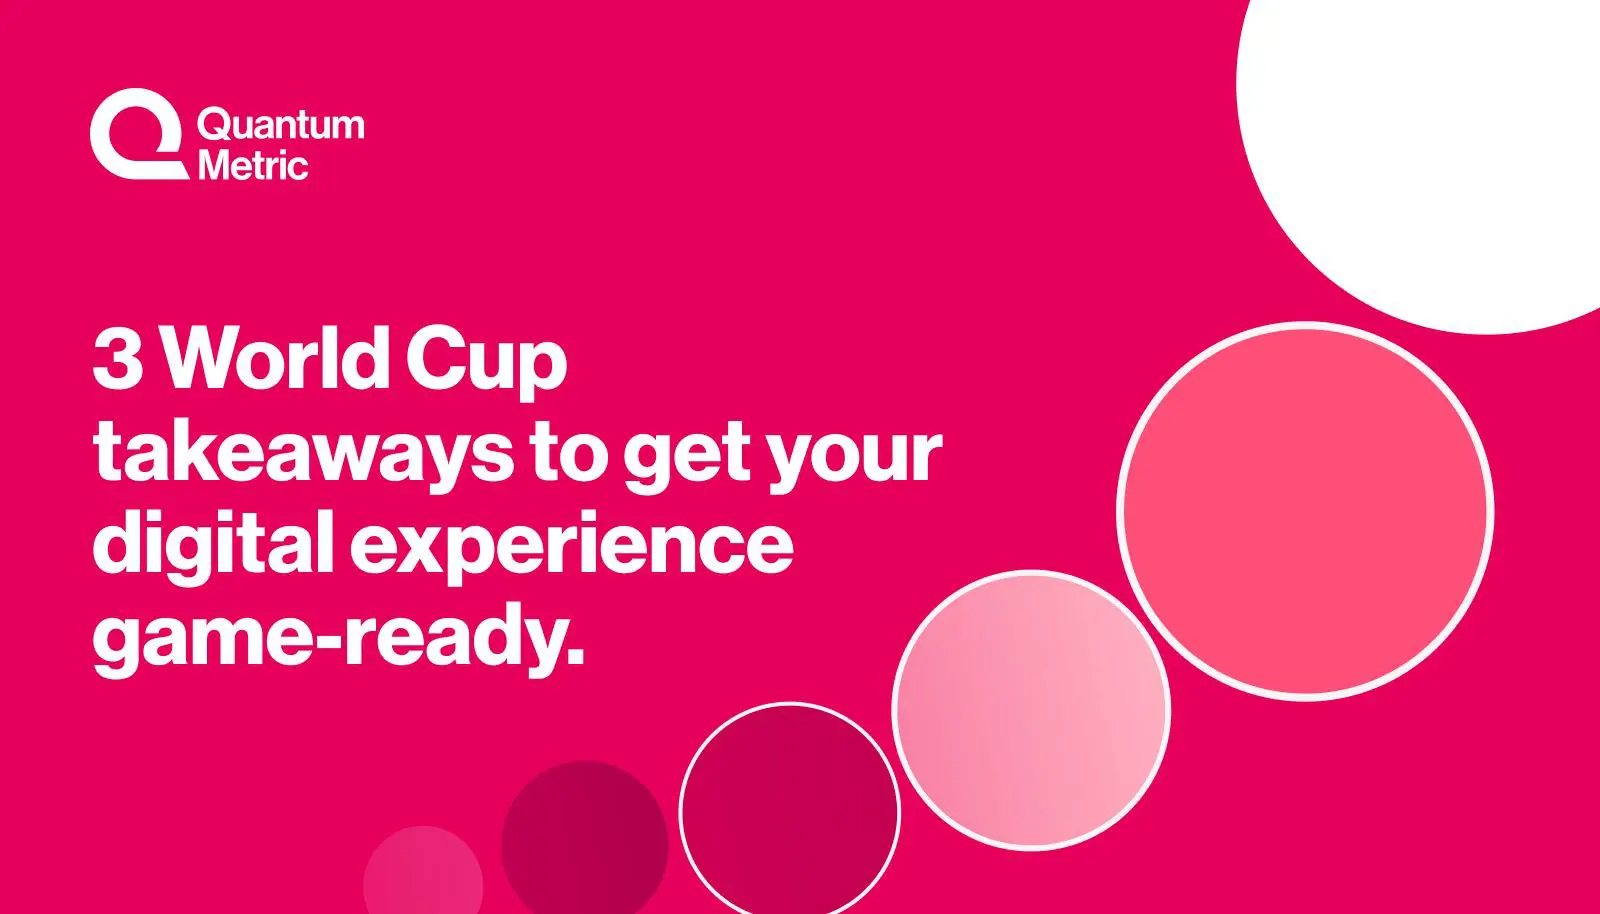 3 World Cup takeaways to get your digital experience game-ready.